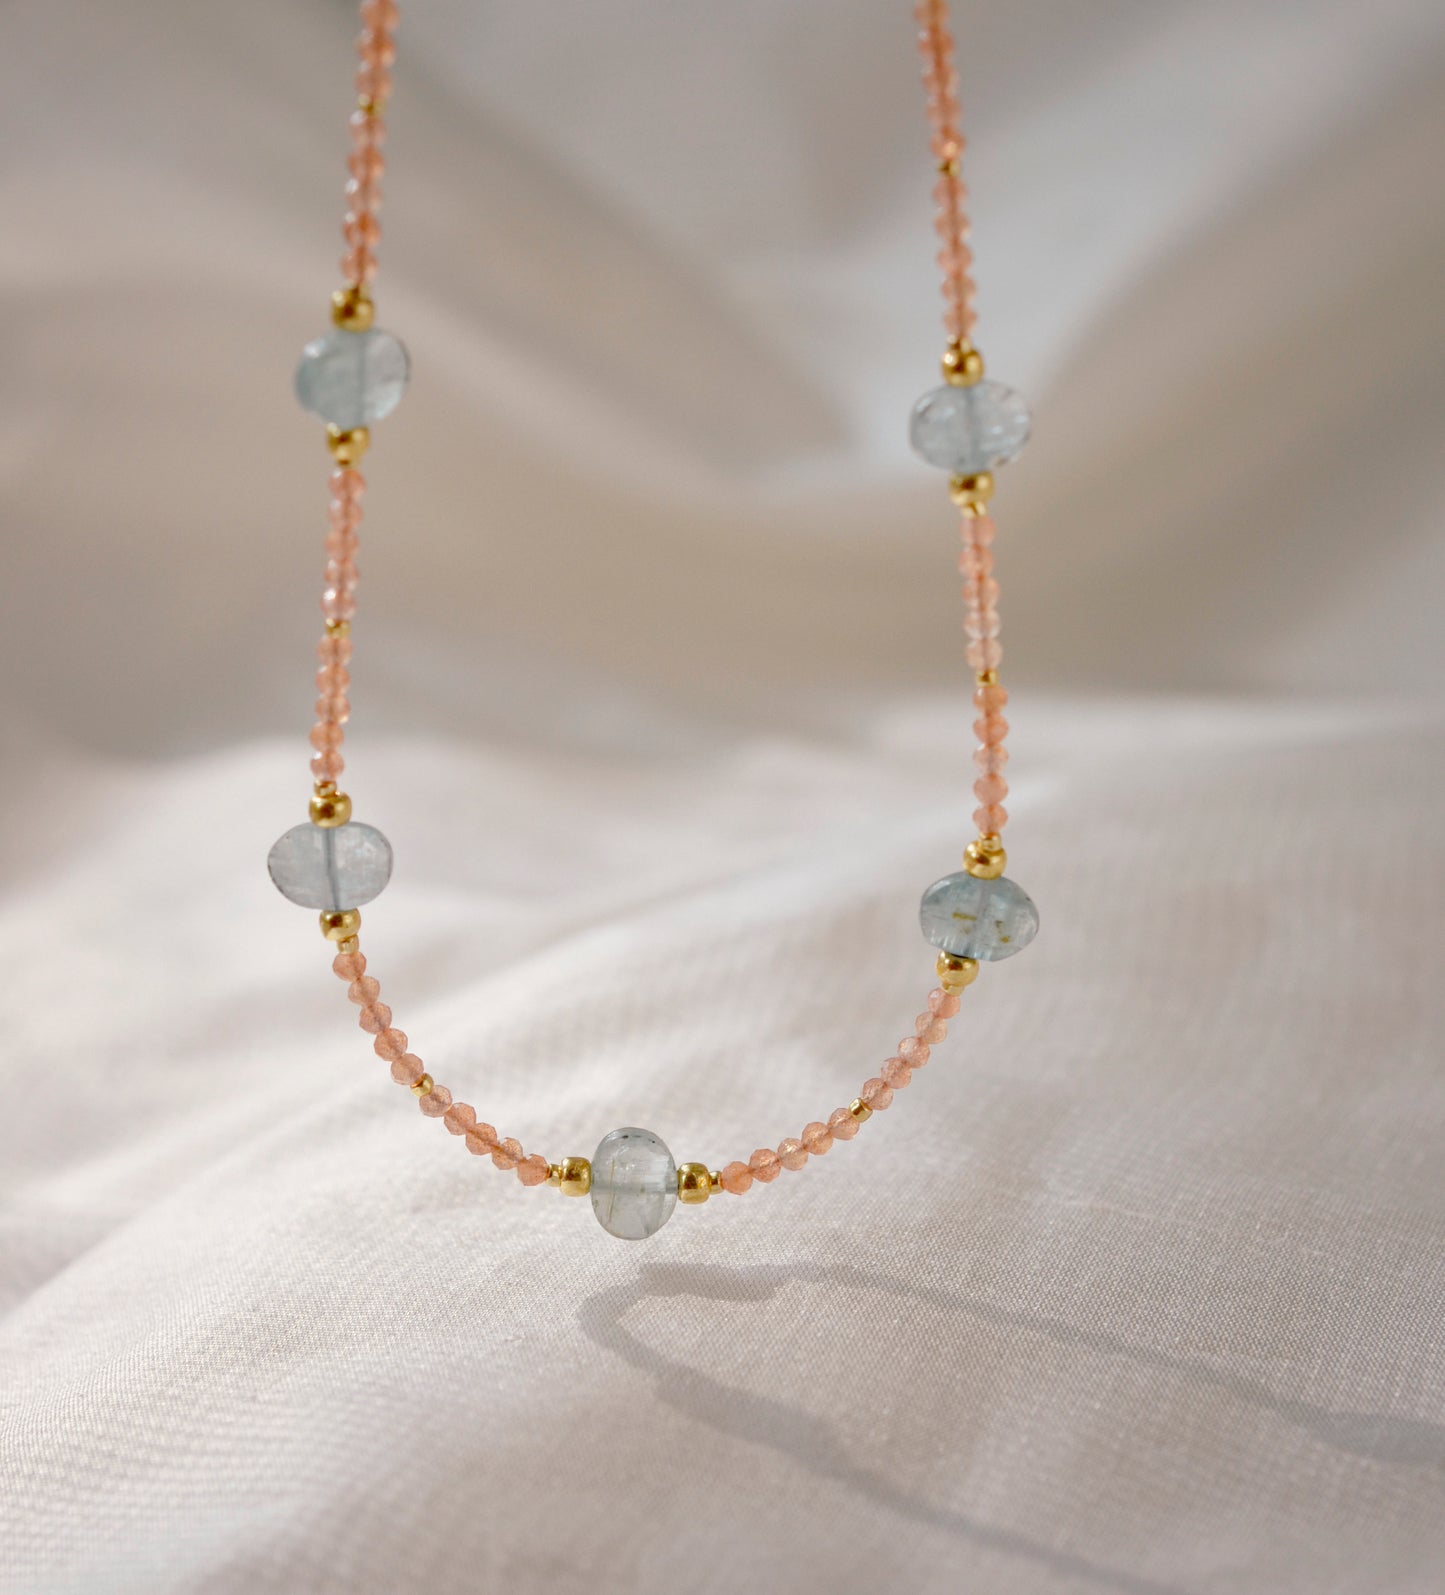 Kyanite and Sunstone Beaded Necklace